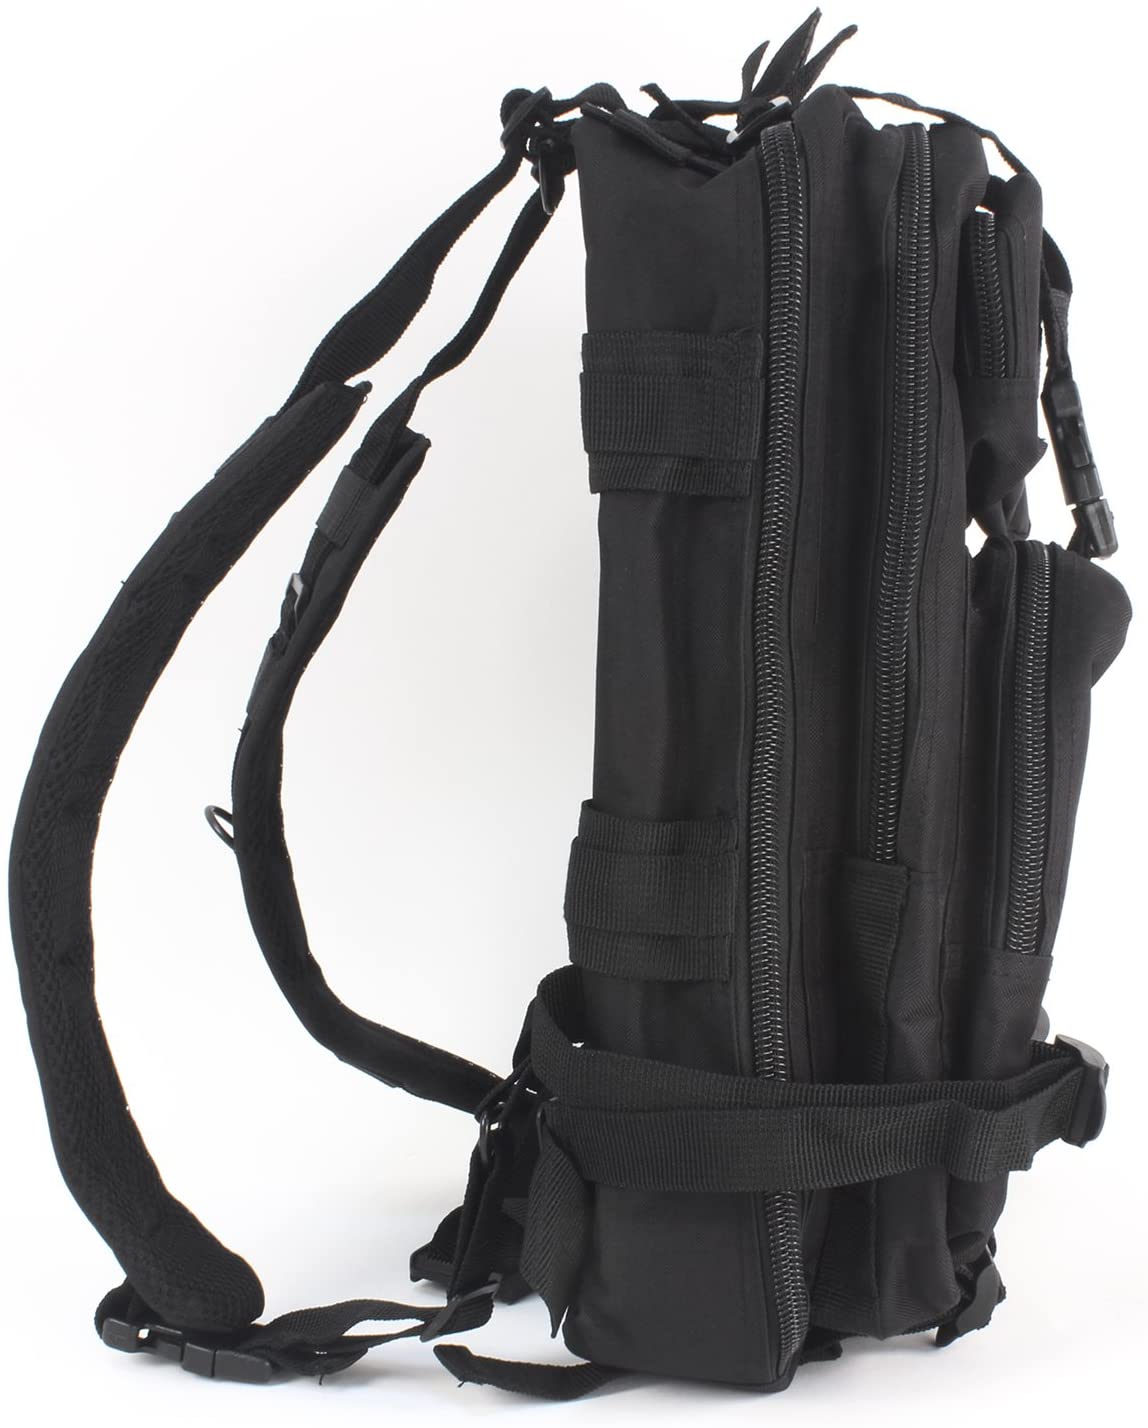 MediTac Tactical Assault Pack - First Aid Rucksack - 18" Military MOLLE Backpack